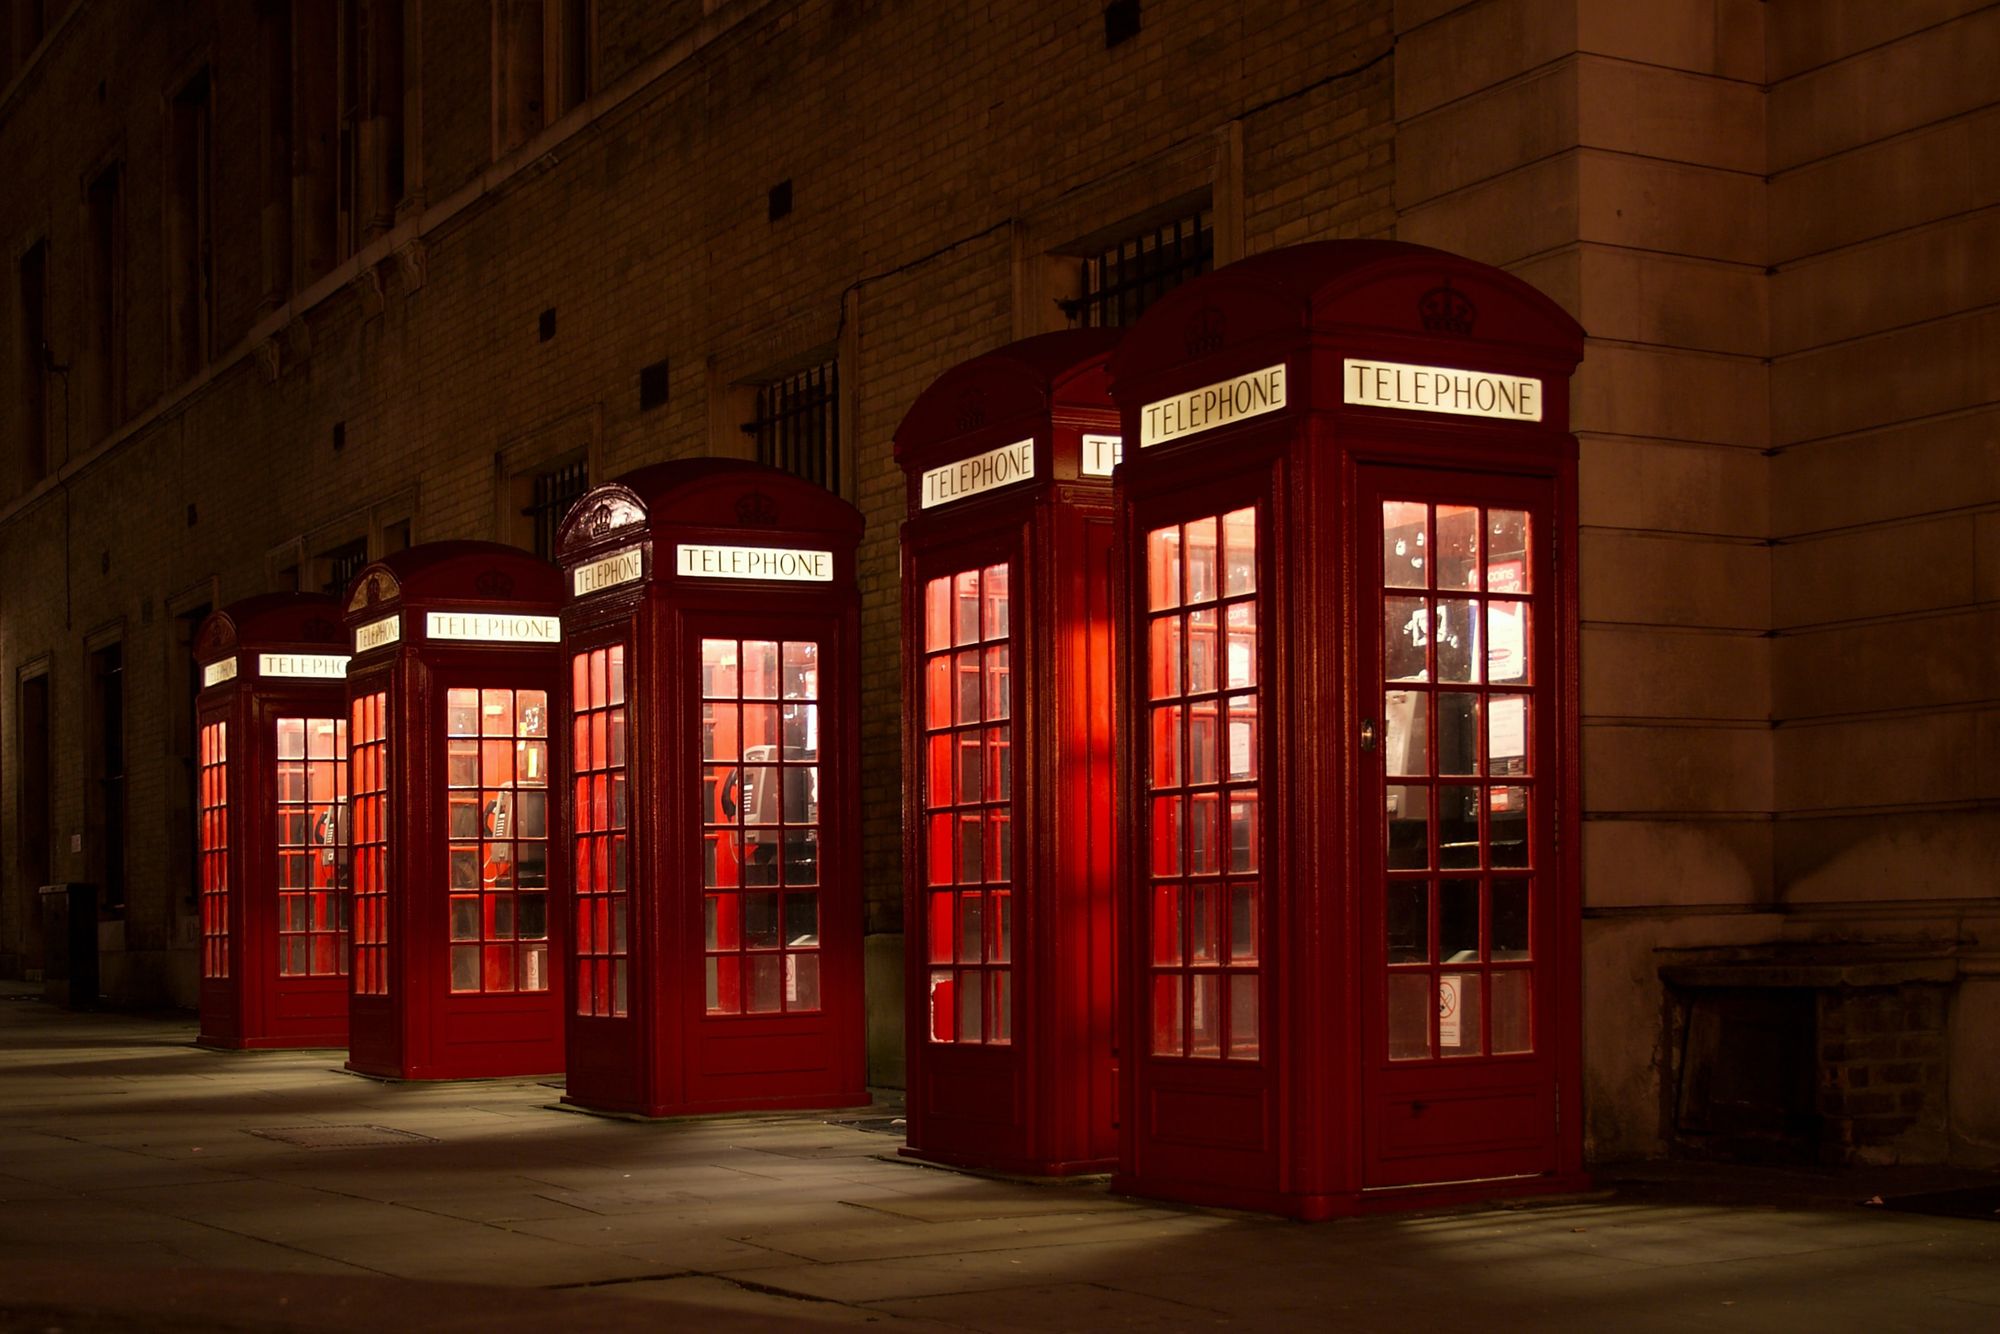 Five telephone booths next to each other at night.